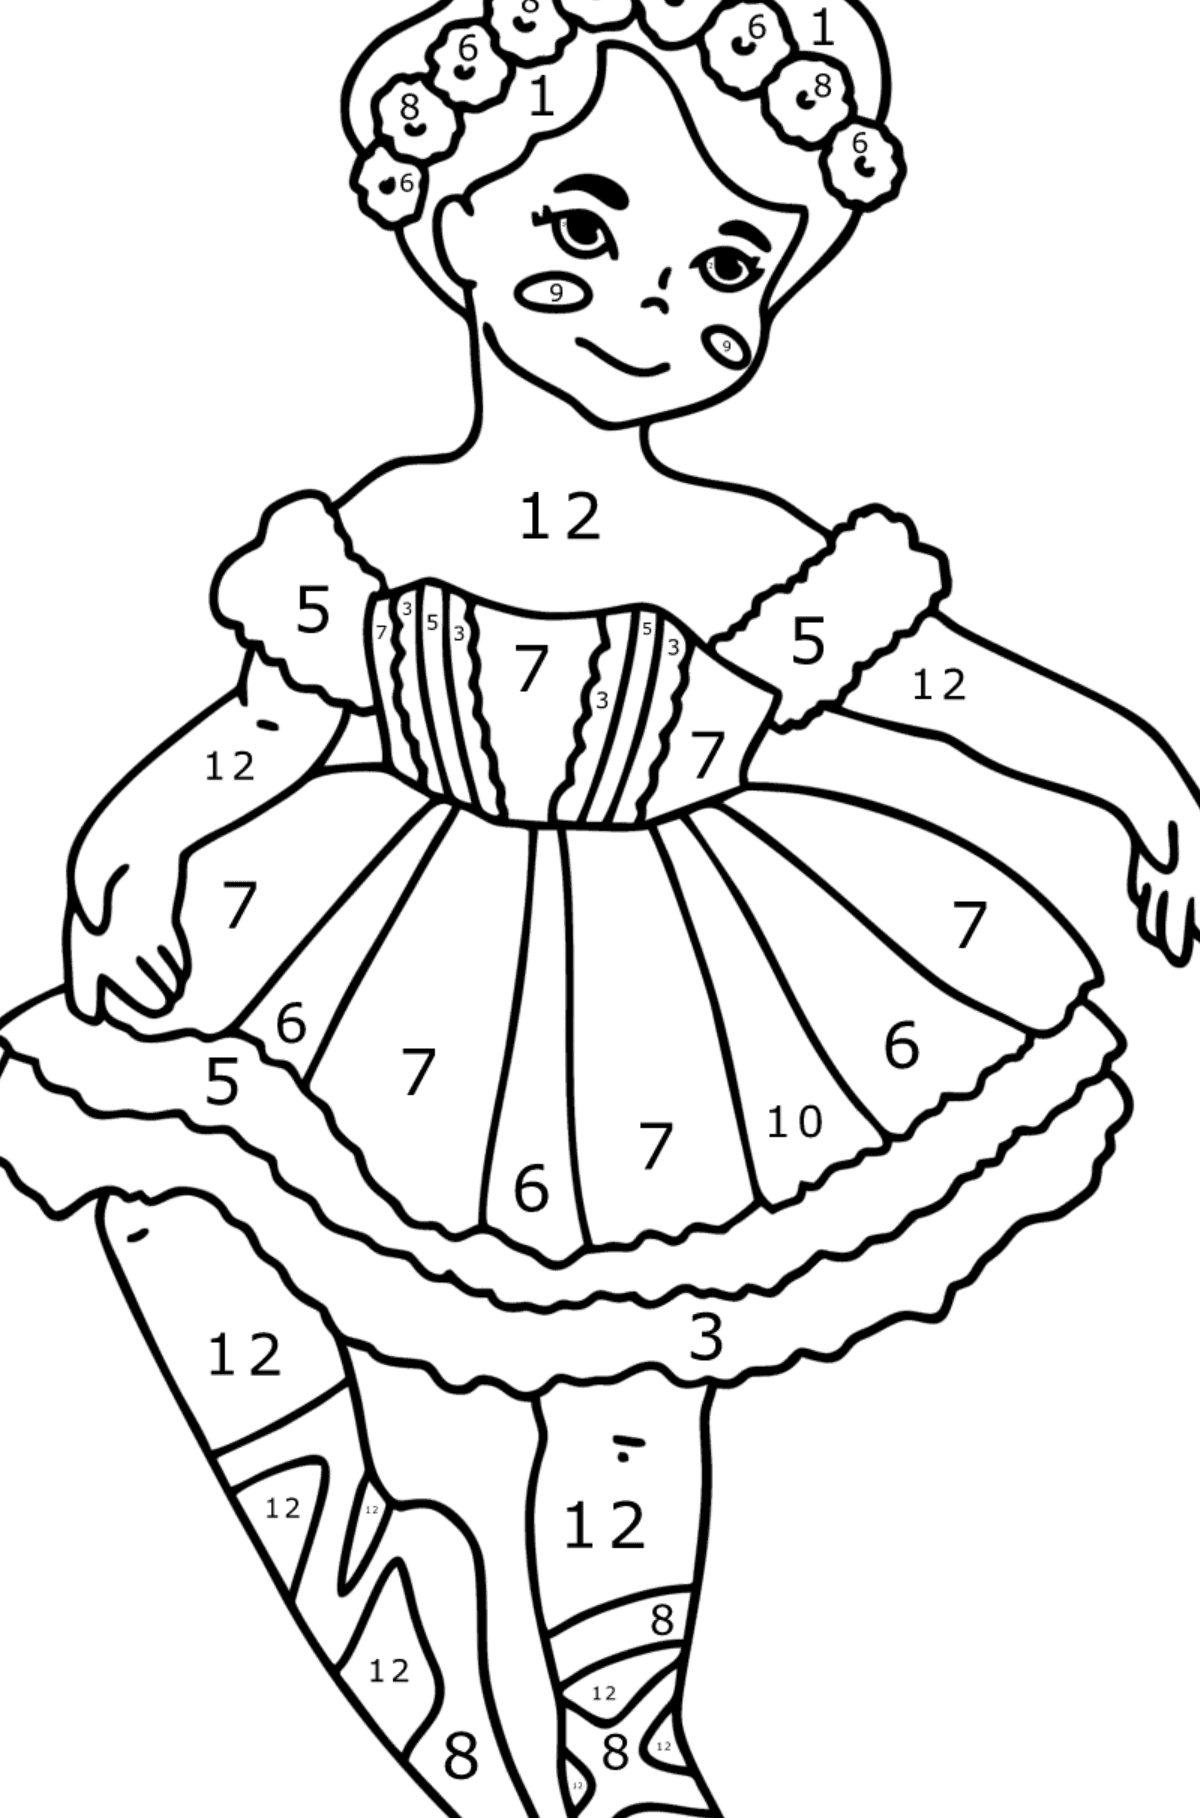 Ballerina girl сoloring page - Coloring by Numbers for Kids